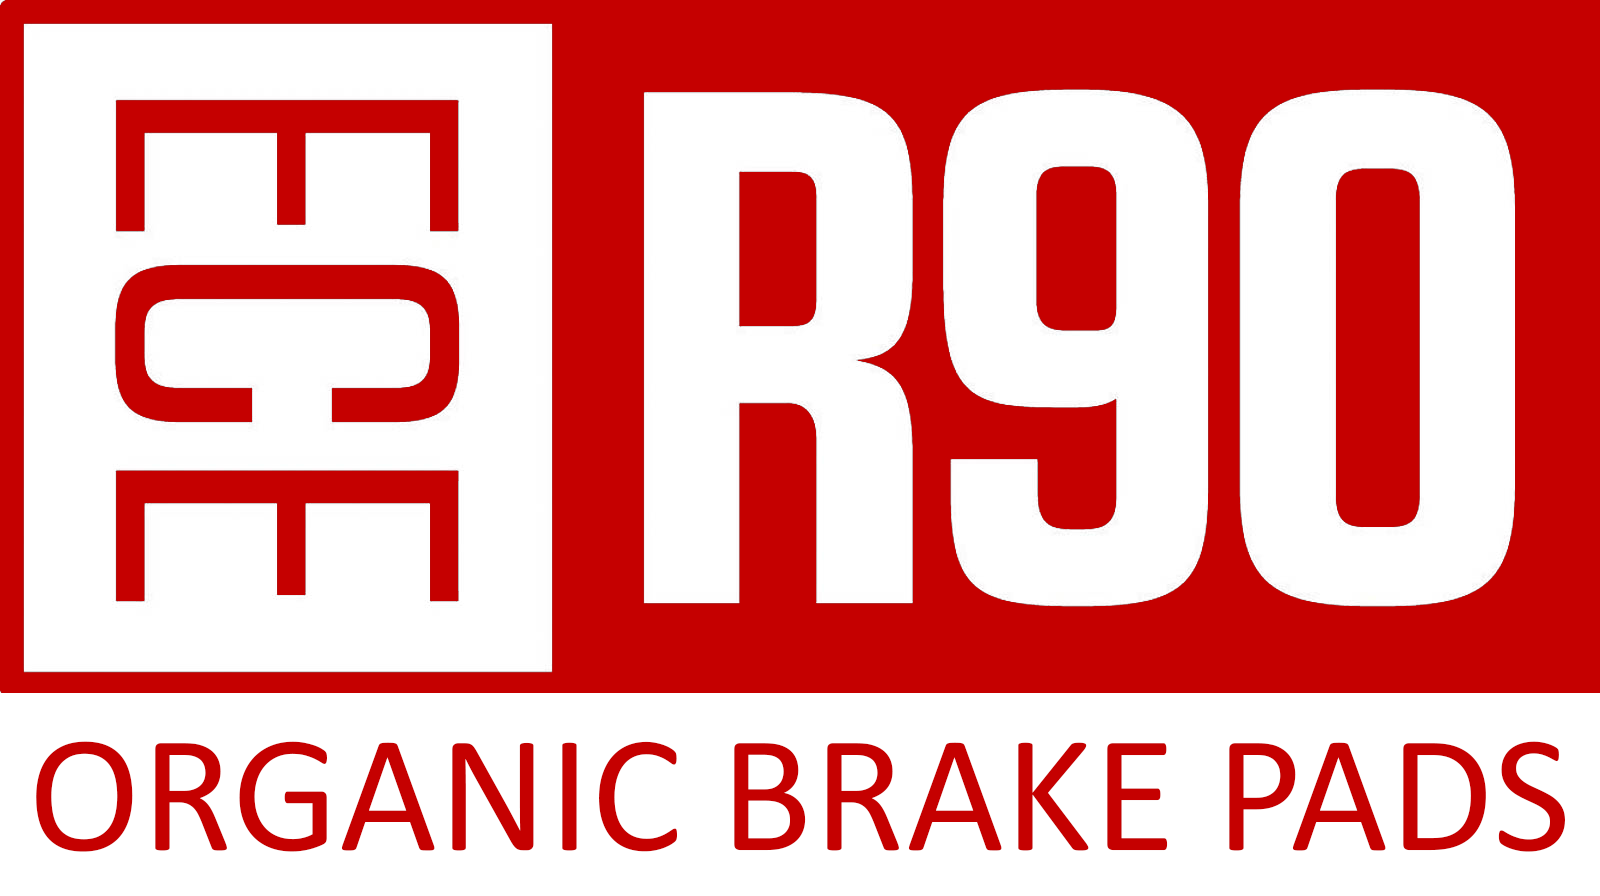 Certifications ECE R 90 for organic brake pads